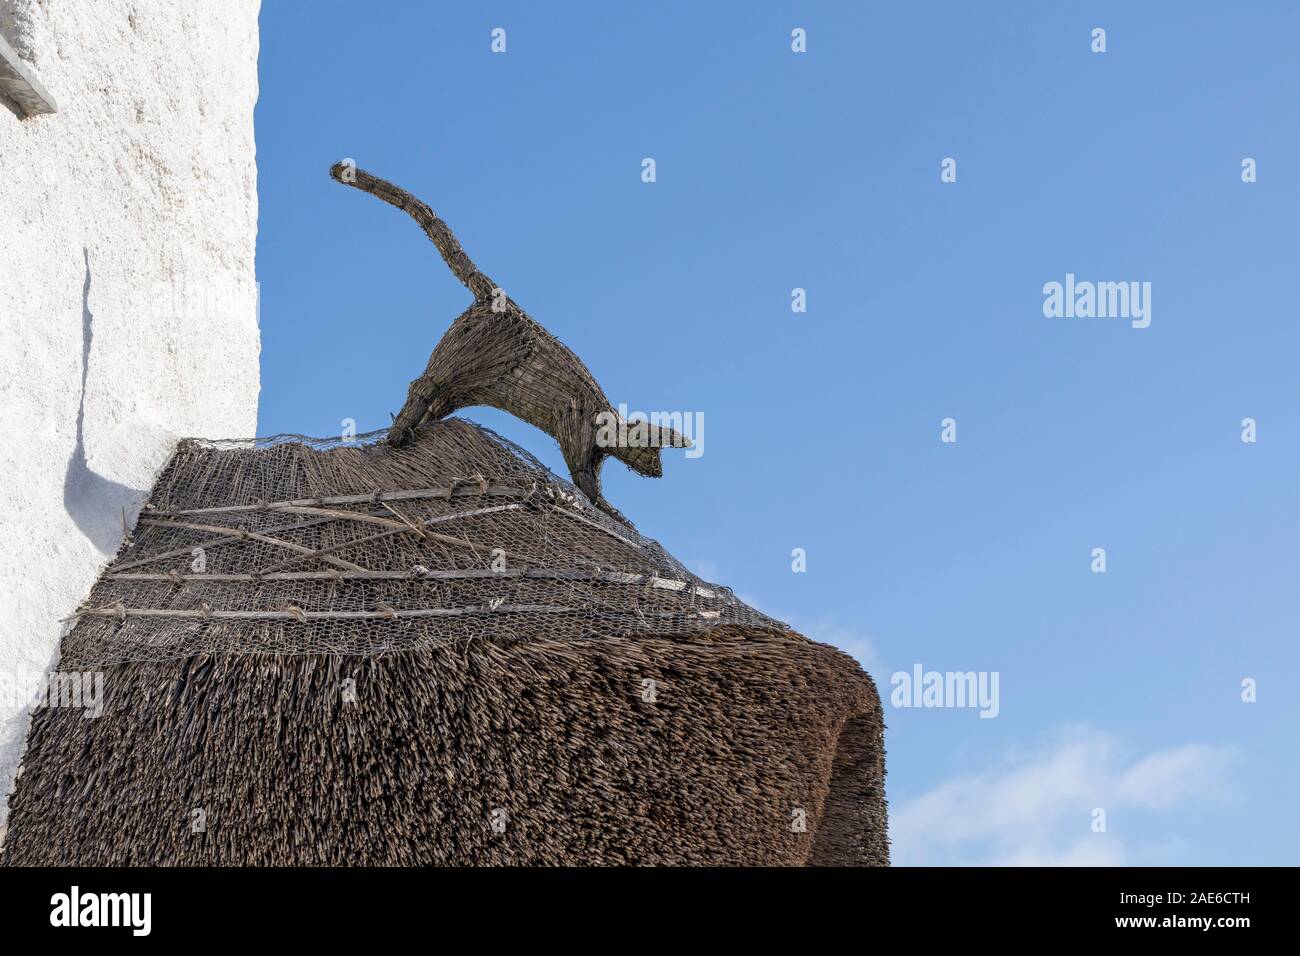 Decorative Thatched Cat Finial on the Thatched Roof of the Mariners Cottages in Church Cove with the View out to Sea, Lizard, Cornwall, UK Stock Photo